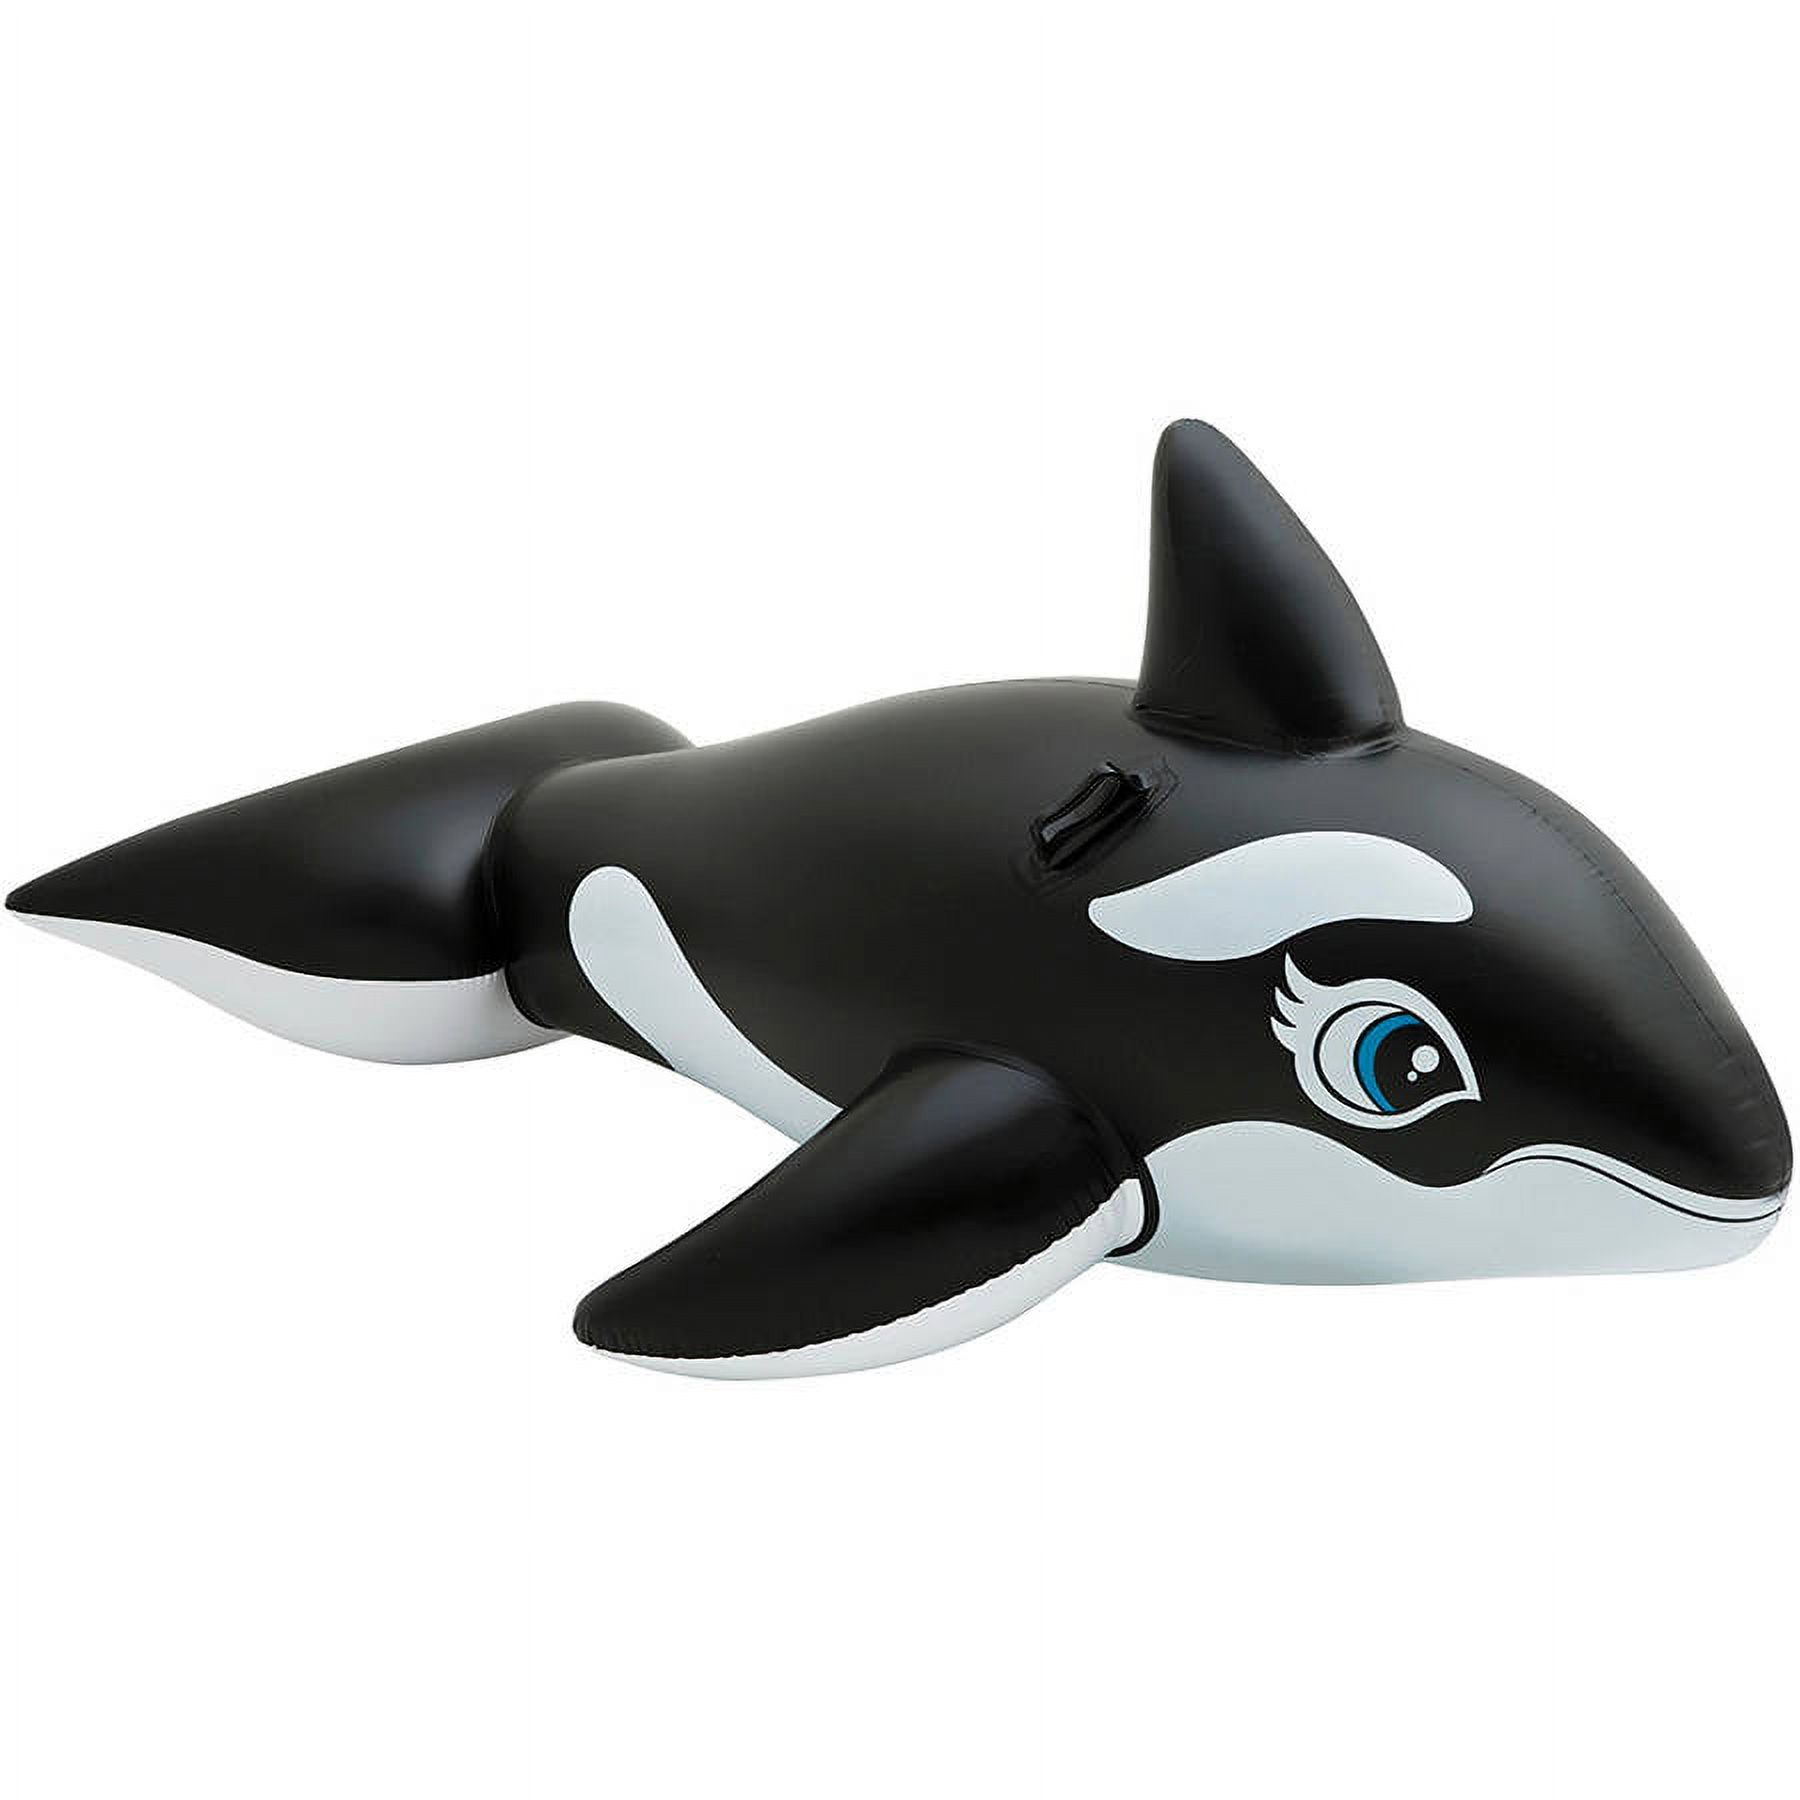 Black and White Orca Whale Ride-On Inflatable Pool Float with Handles for Ages 3+ - image 2 of 2